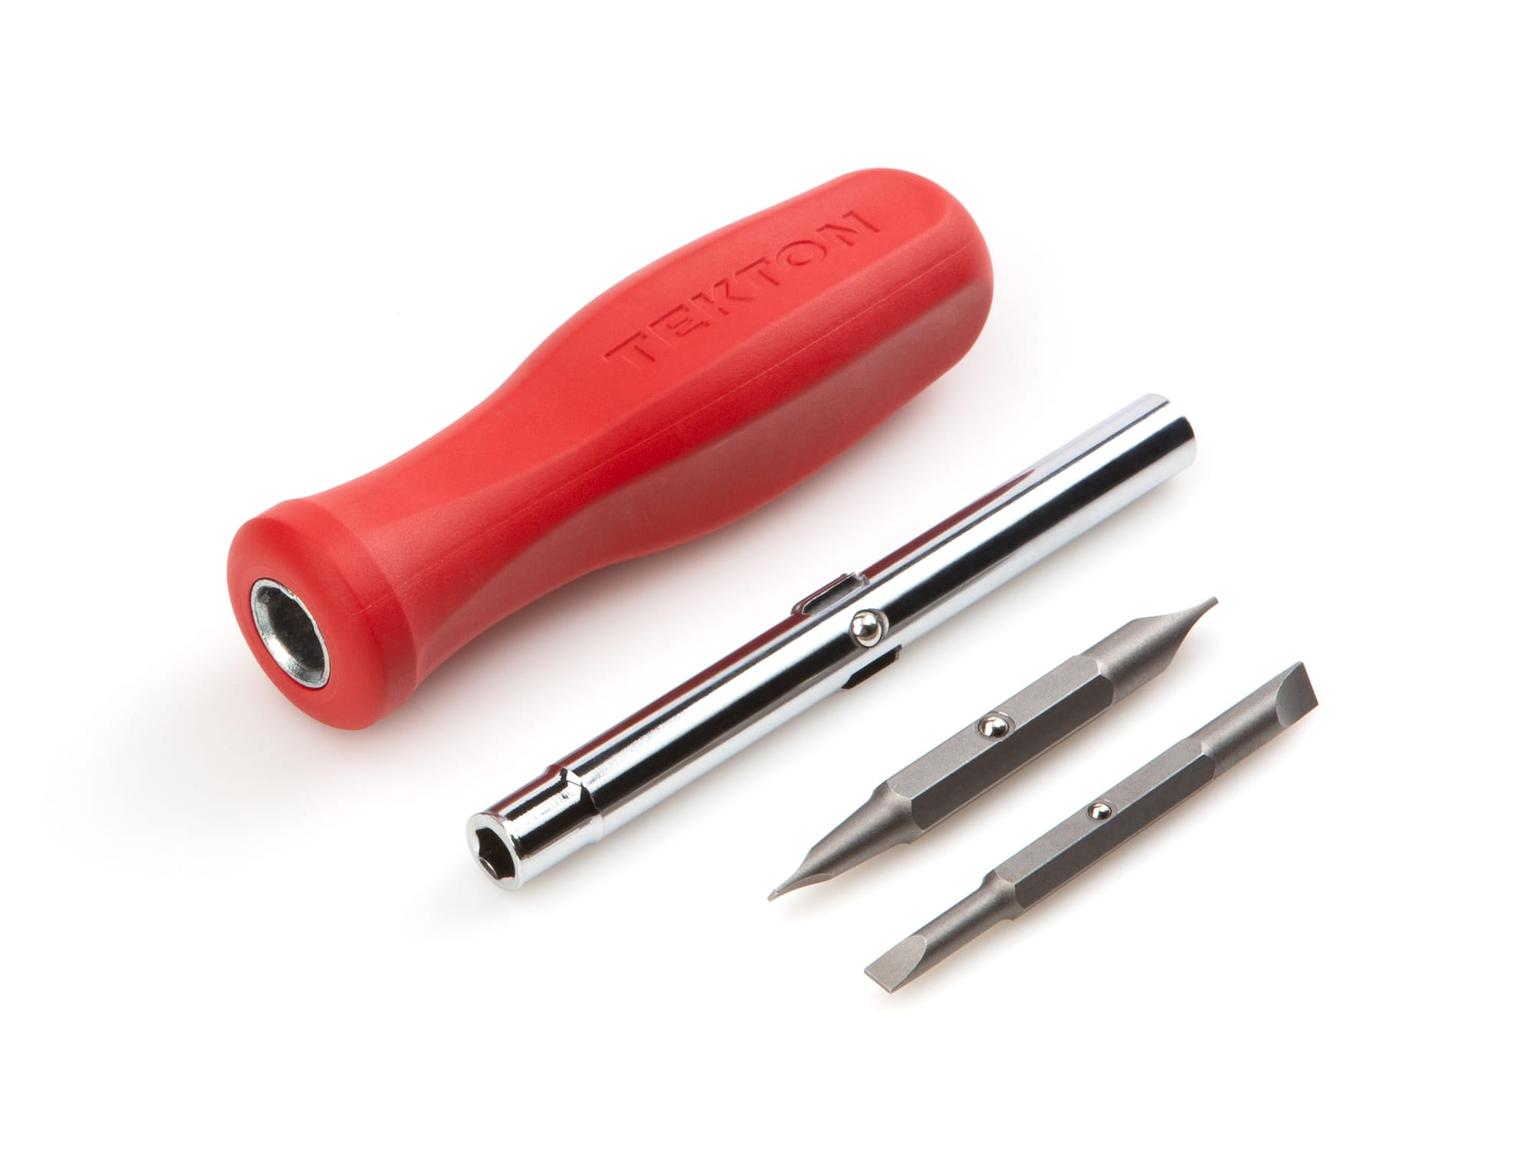 TEKTON DMS18017-T 6-in-1 Slotted Driver (3/16 in. x 1/4 in., 1/8 in. x 5/16 in., Red)